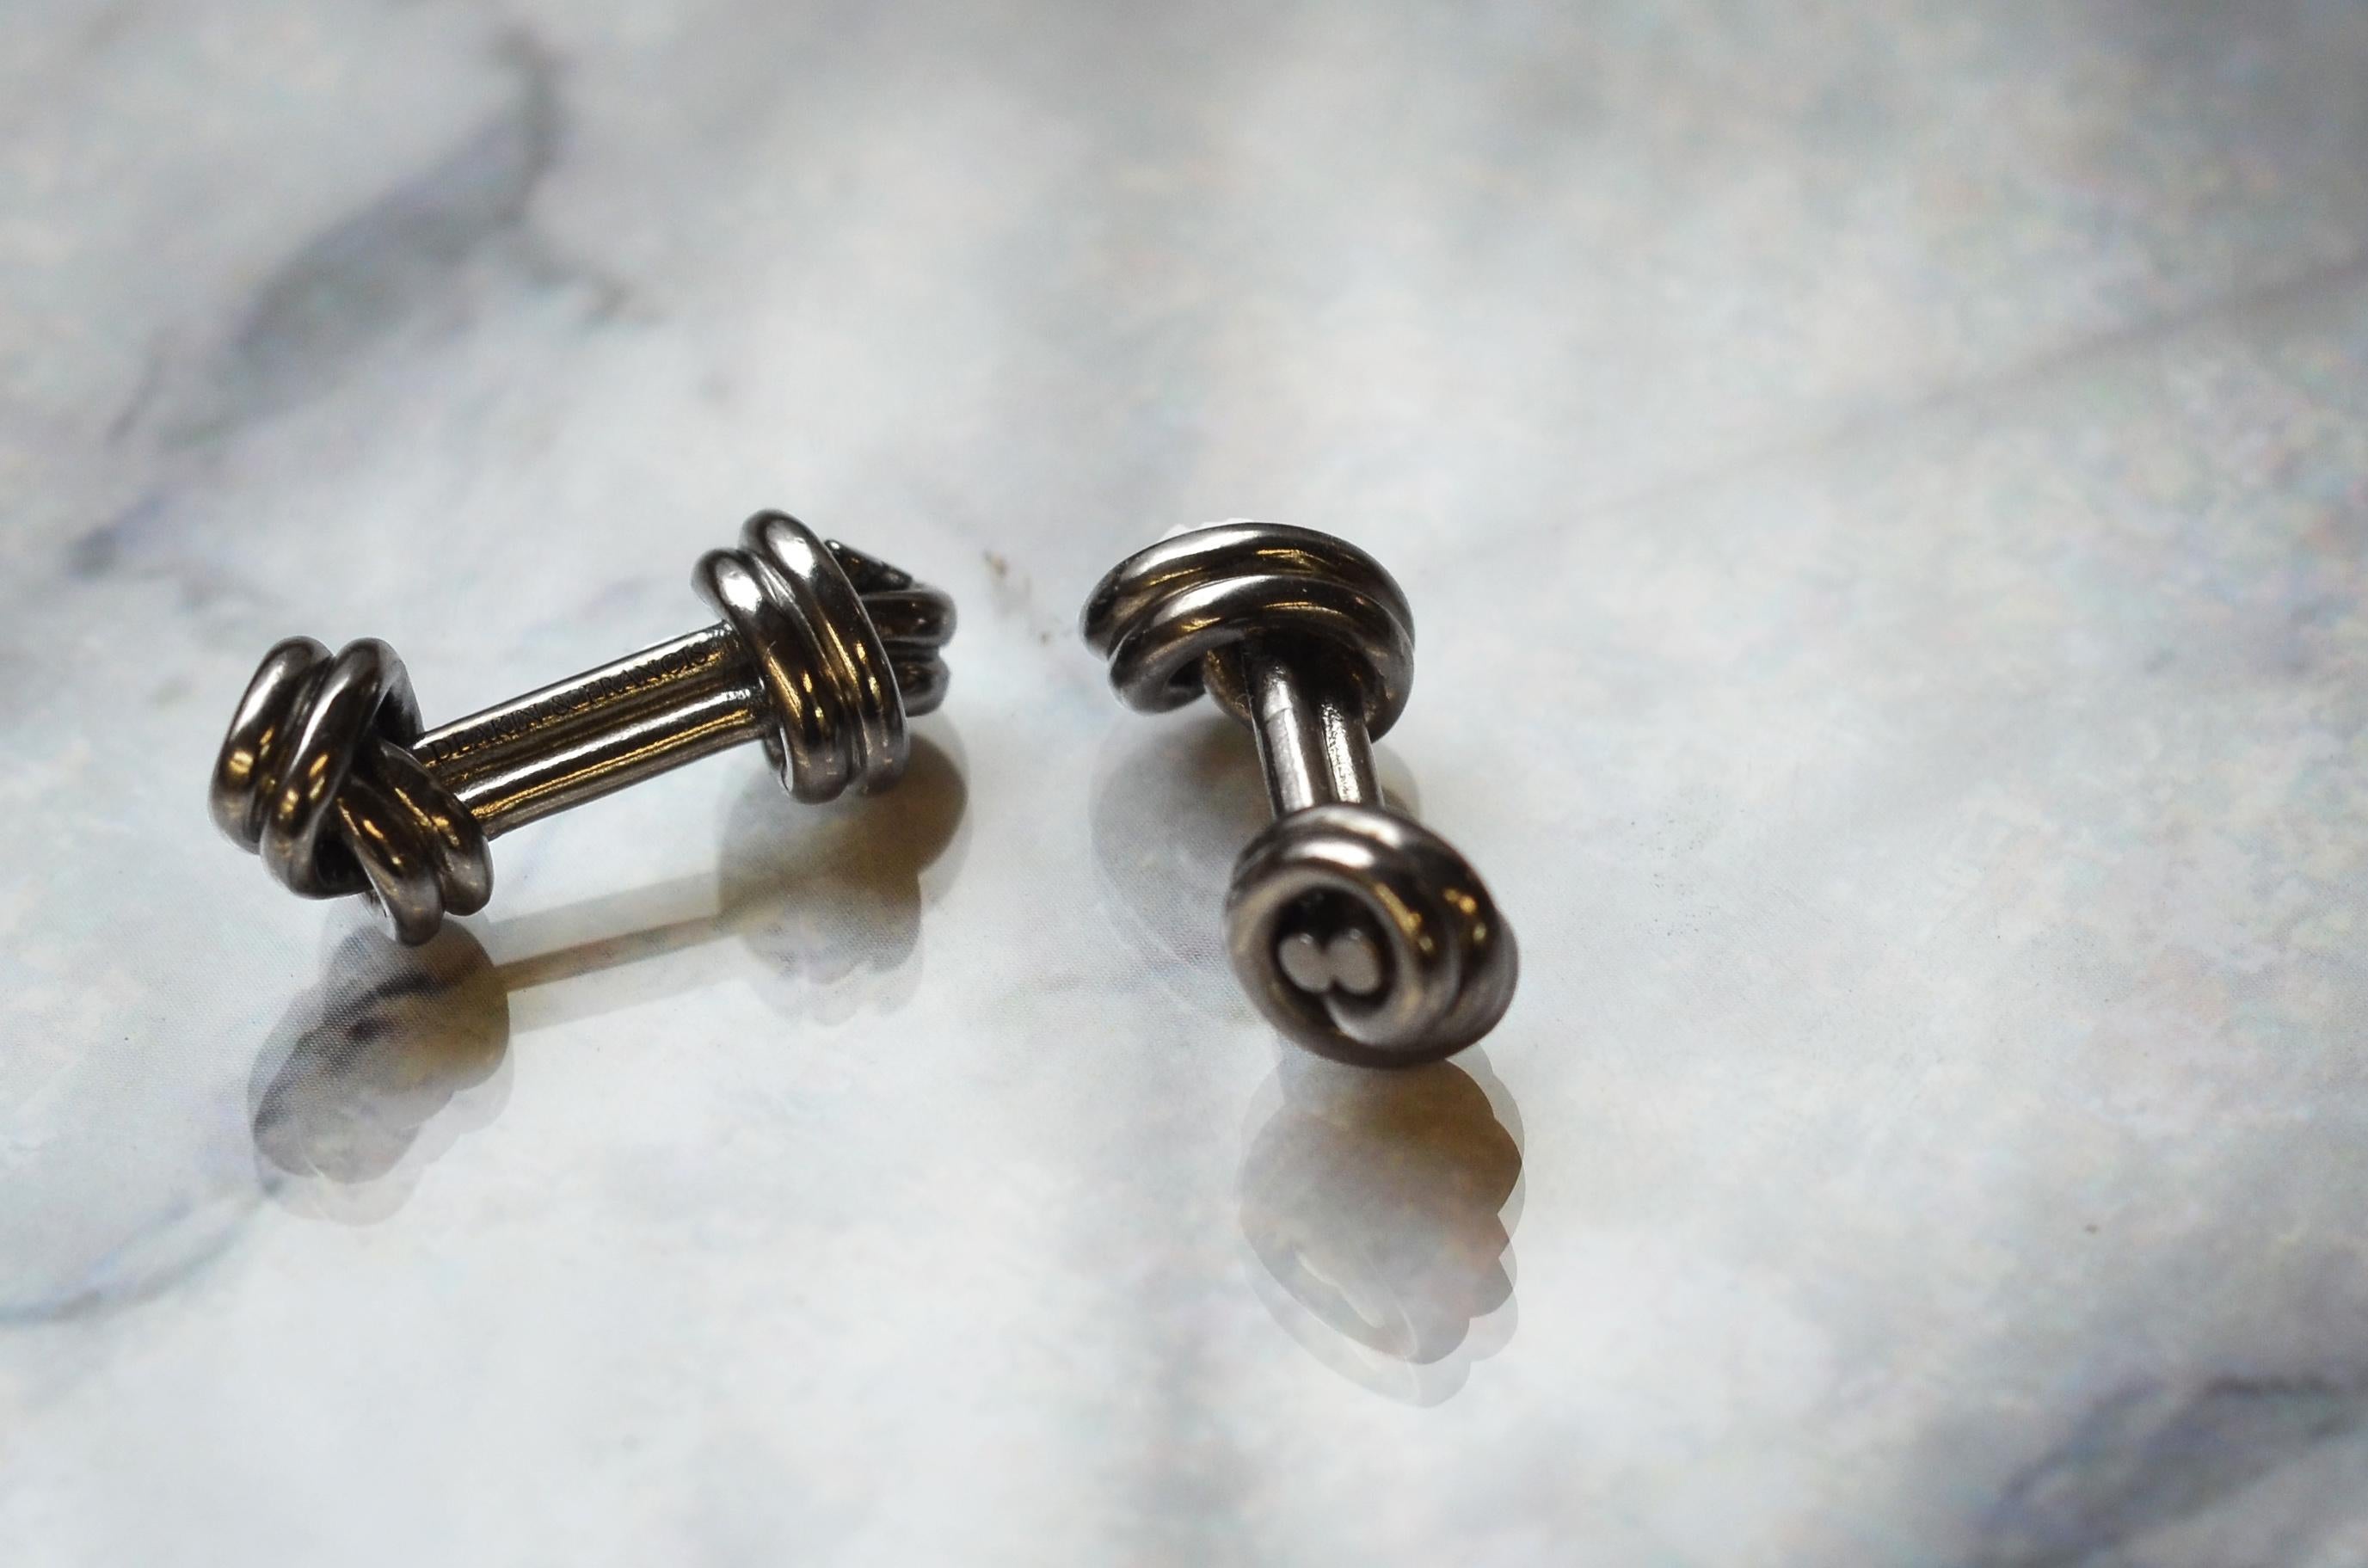 DEAKIN & FRANCIS, Piccadilly Arcade, London

Don't get yourself in knots over your cufflinks, choose these edgy dark grey double knot cufflinks for the ultimate stylish look. With interwoven knots on a bar, this design that is made to last a life